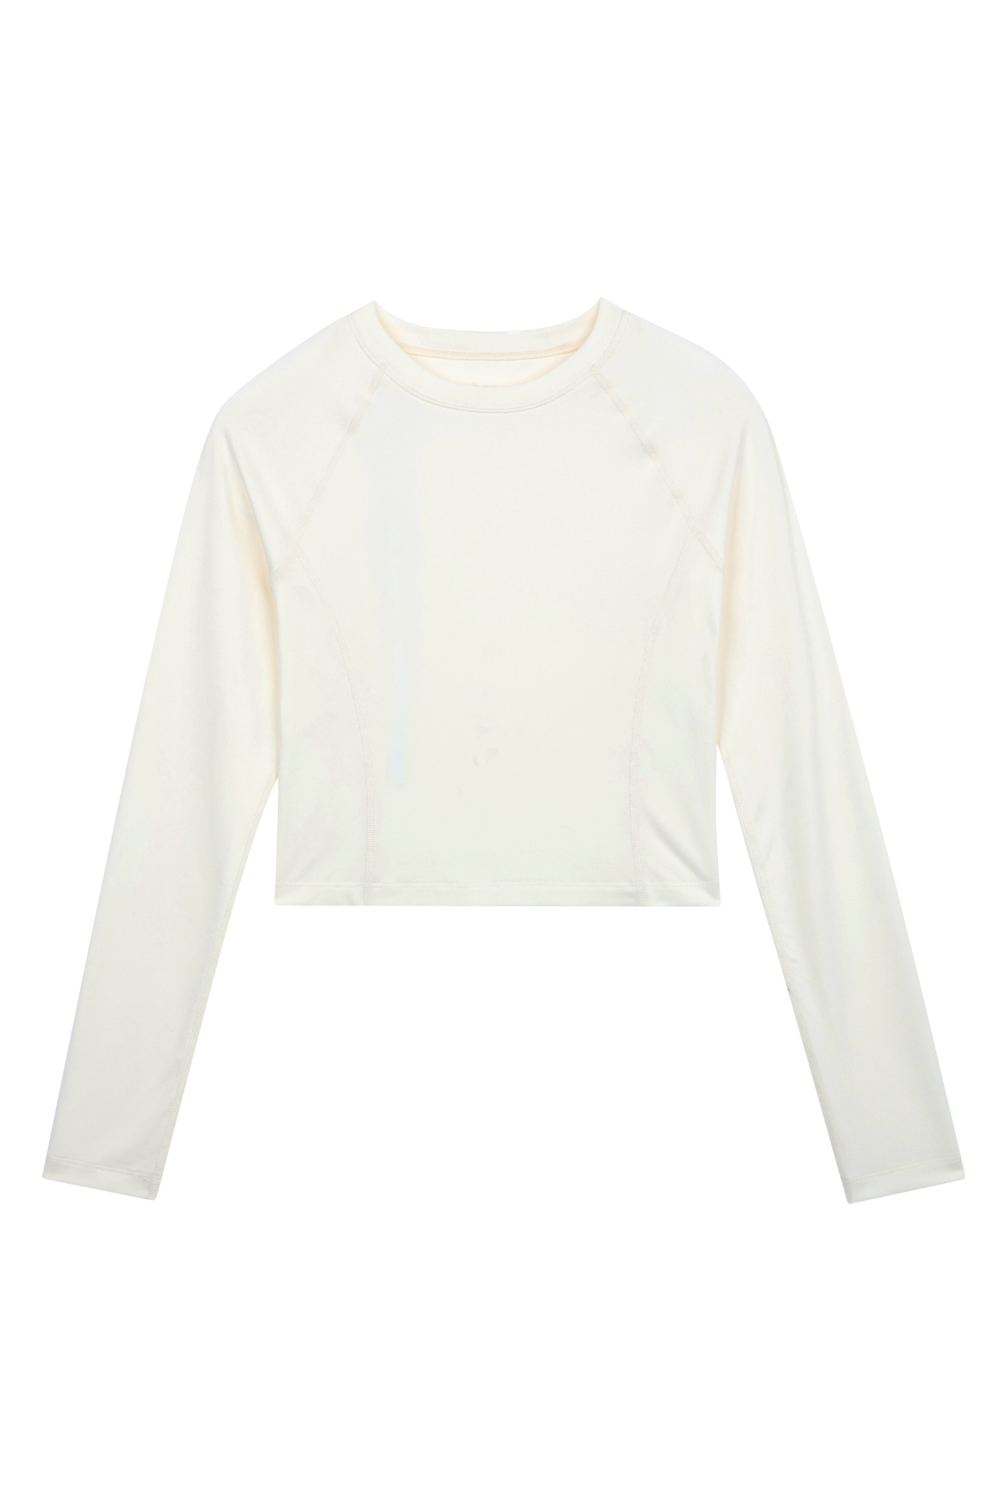 Airtouch Pace Melange Crop Long Sleeve